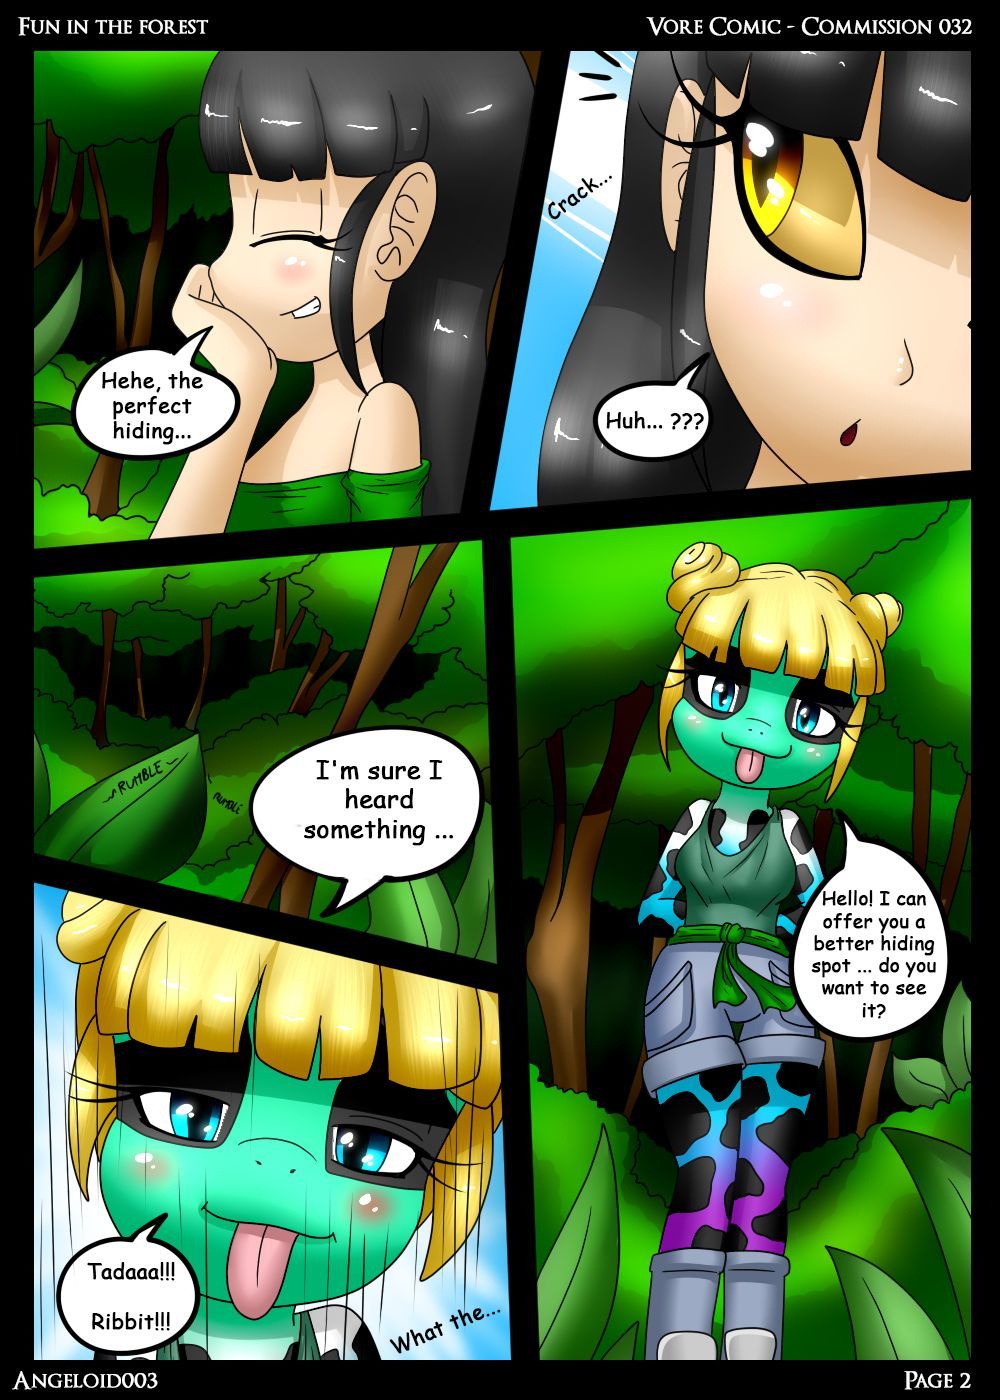 Fun in the Forest - Comm032 Angeloid003 page 2